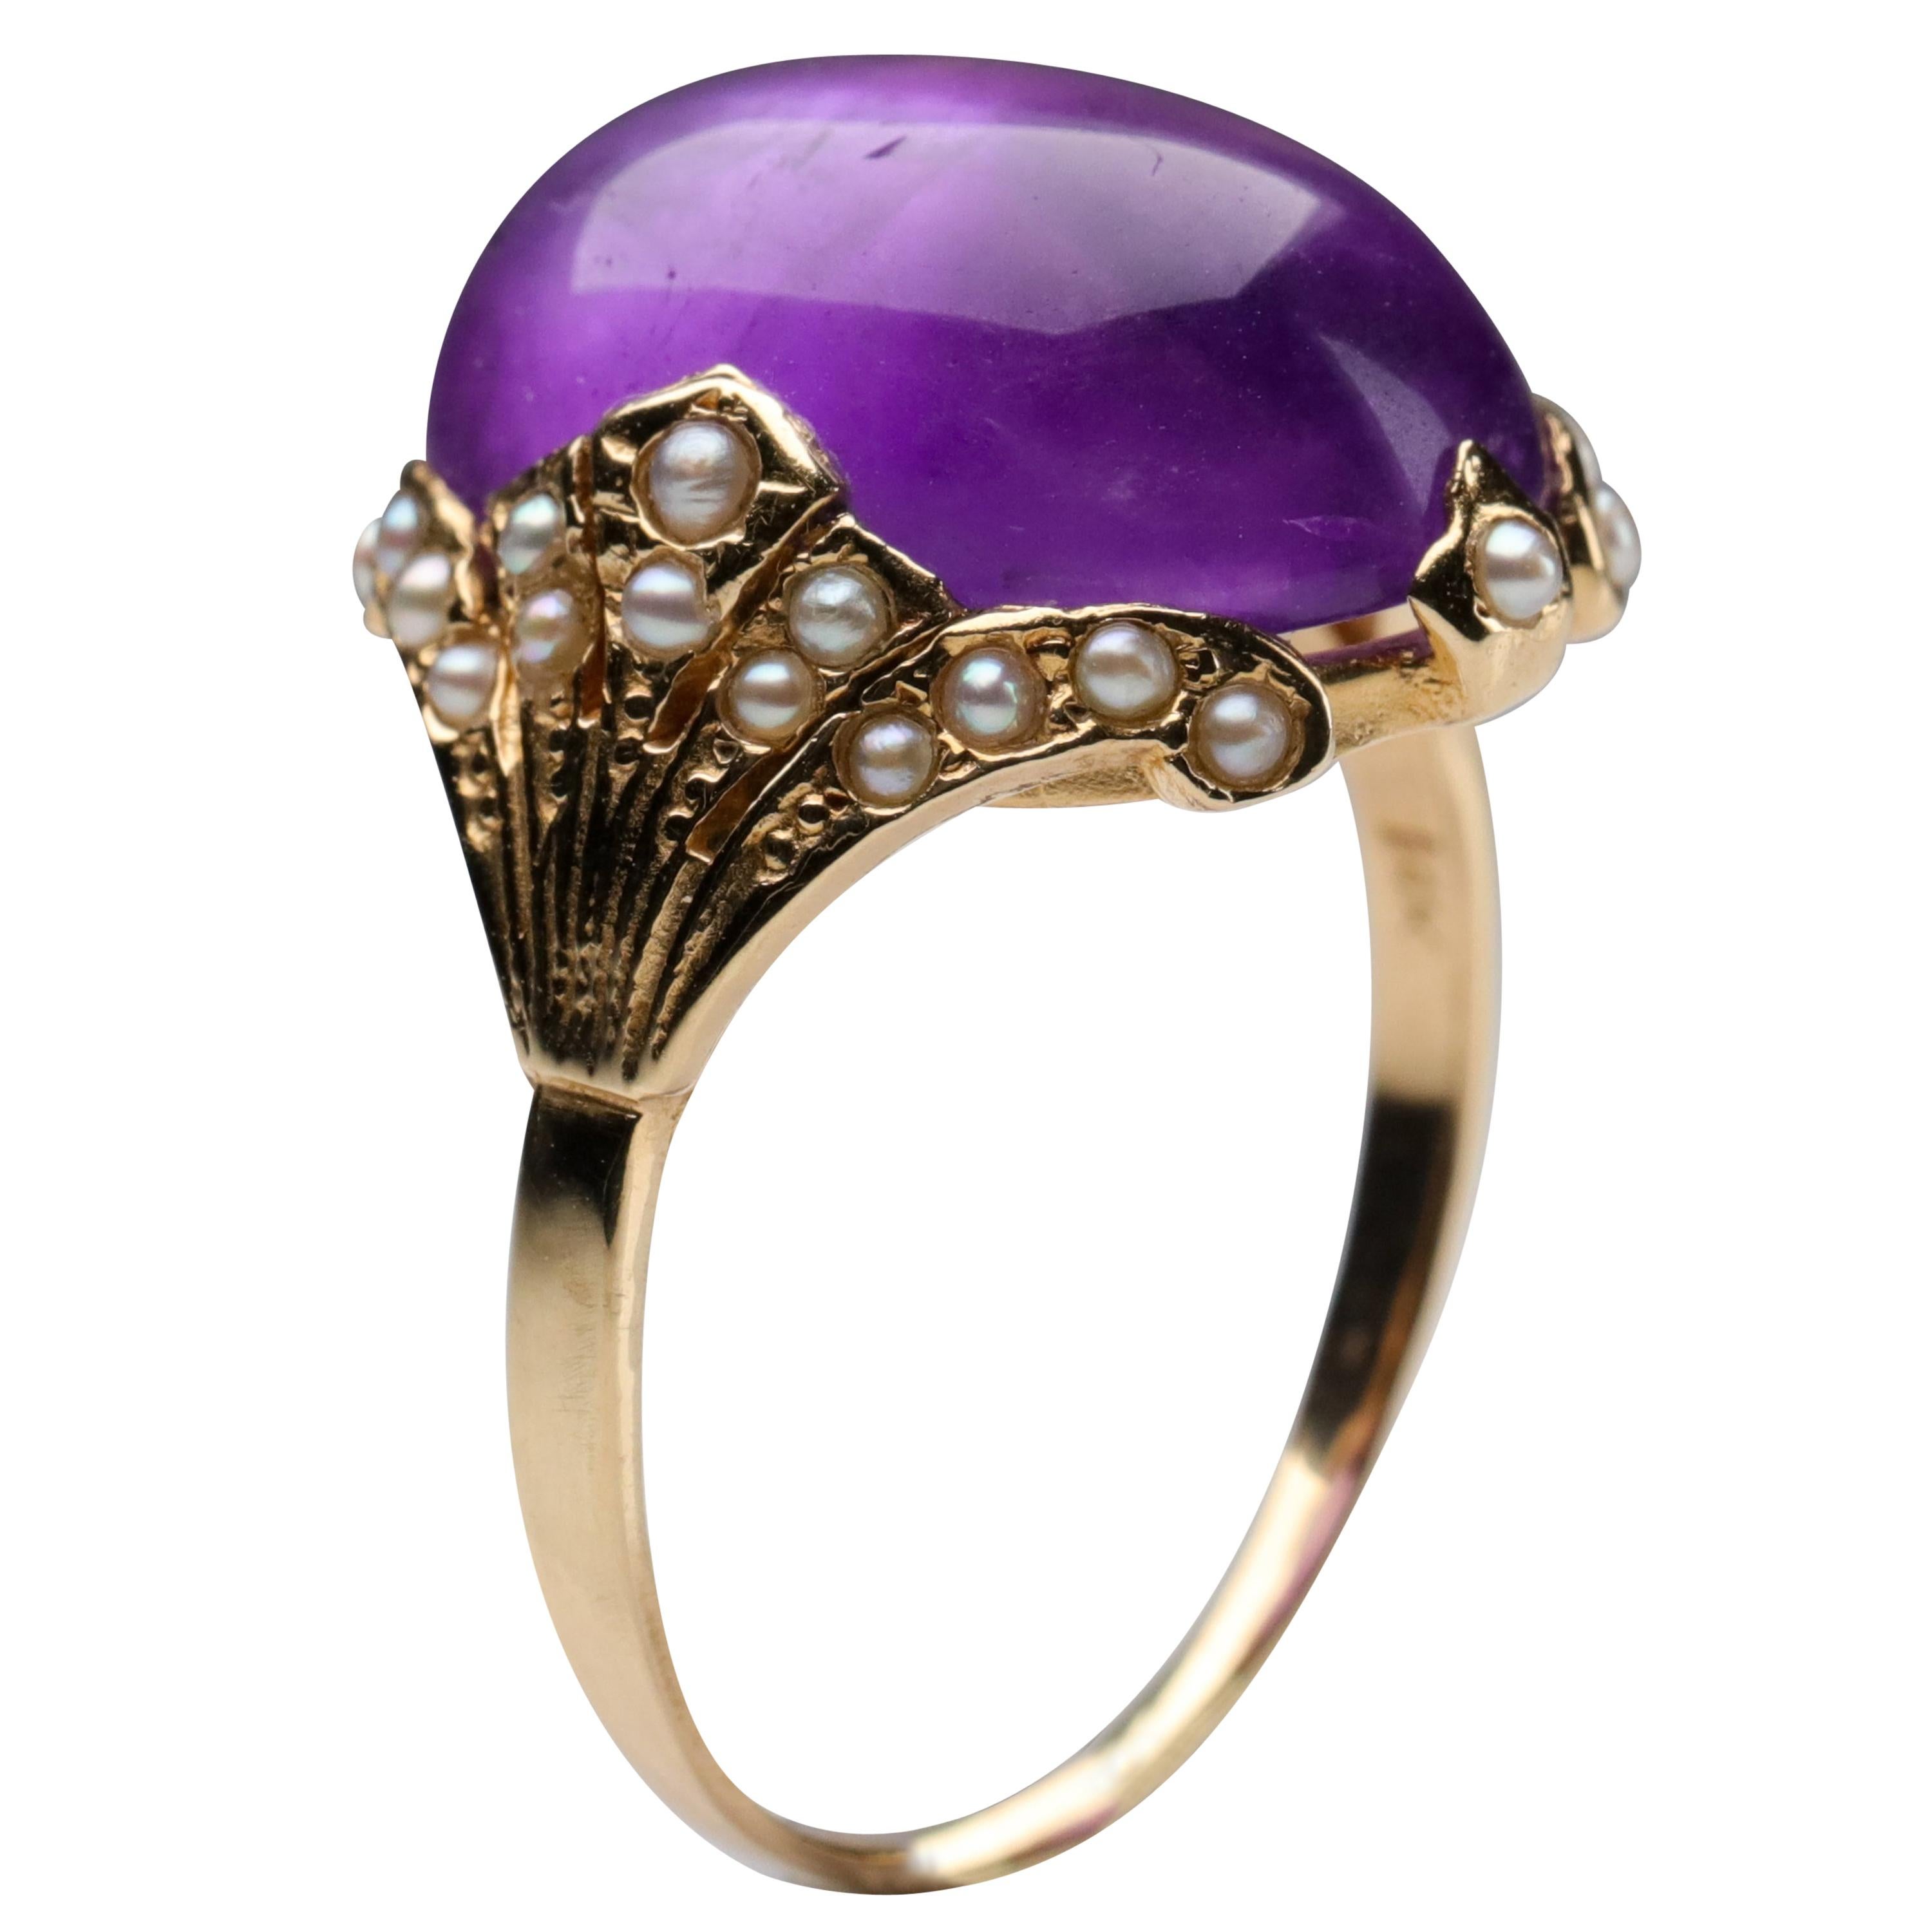 Victorian Amethyst Ring for Divination, Scrying, Soothsaying or Just Fashion